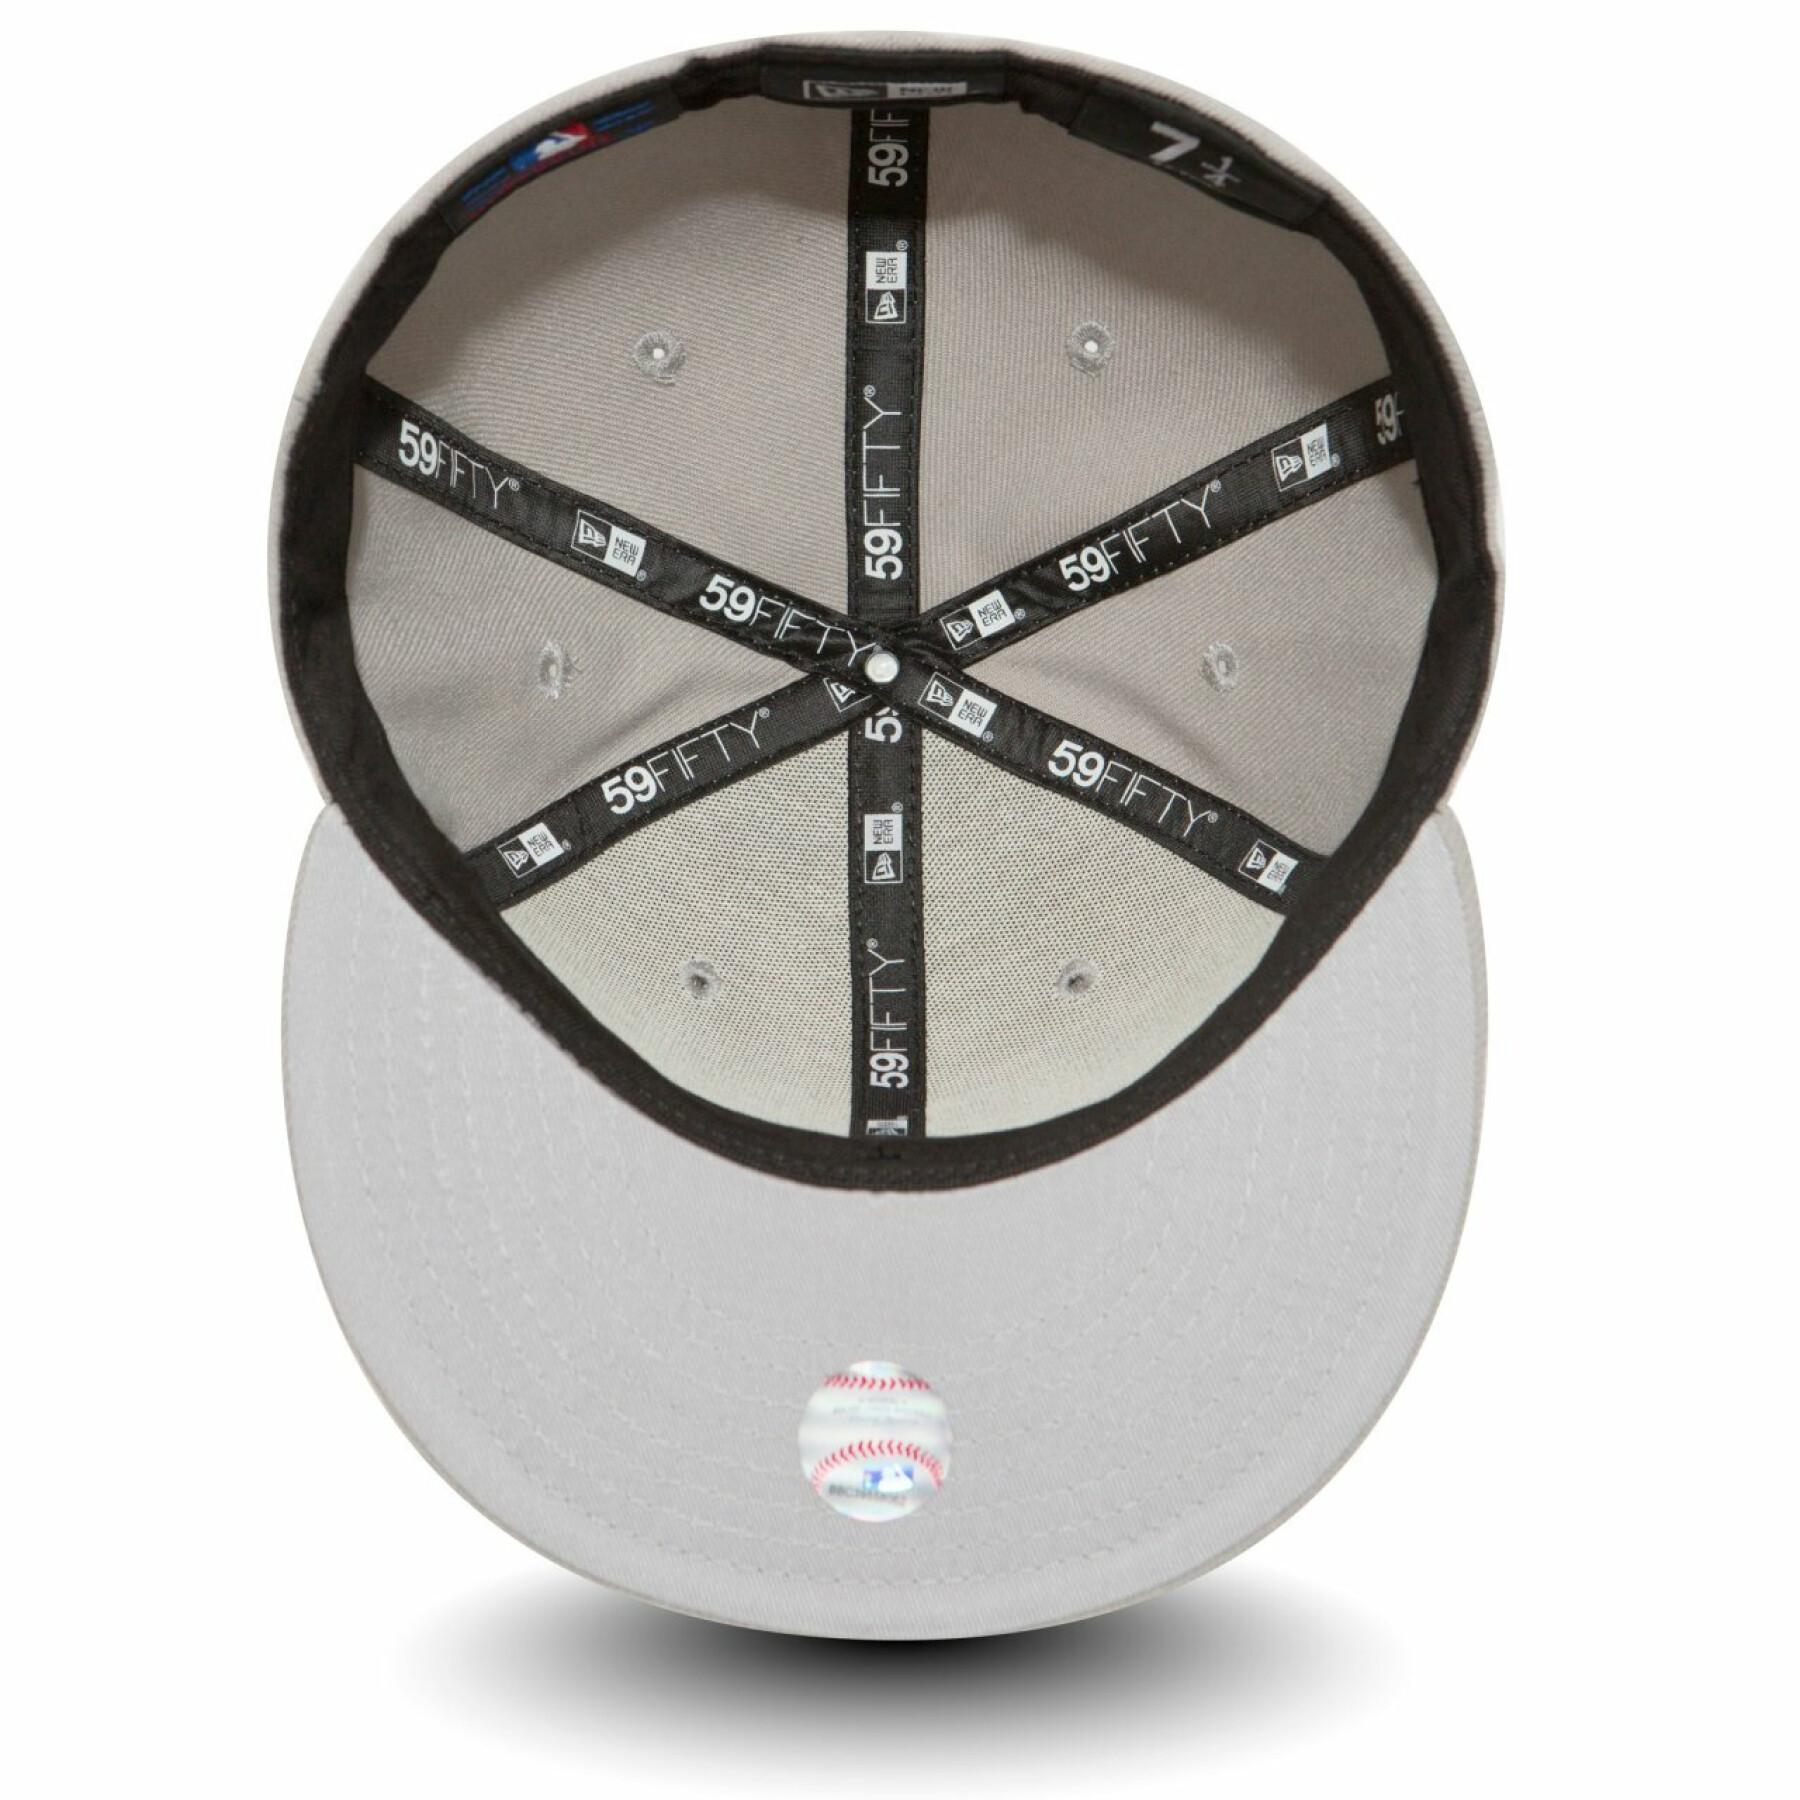 Casquette New Era  essential 59fifty Los Angeles Dodgers